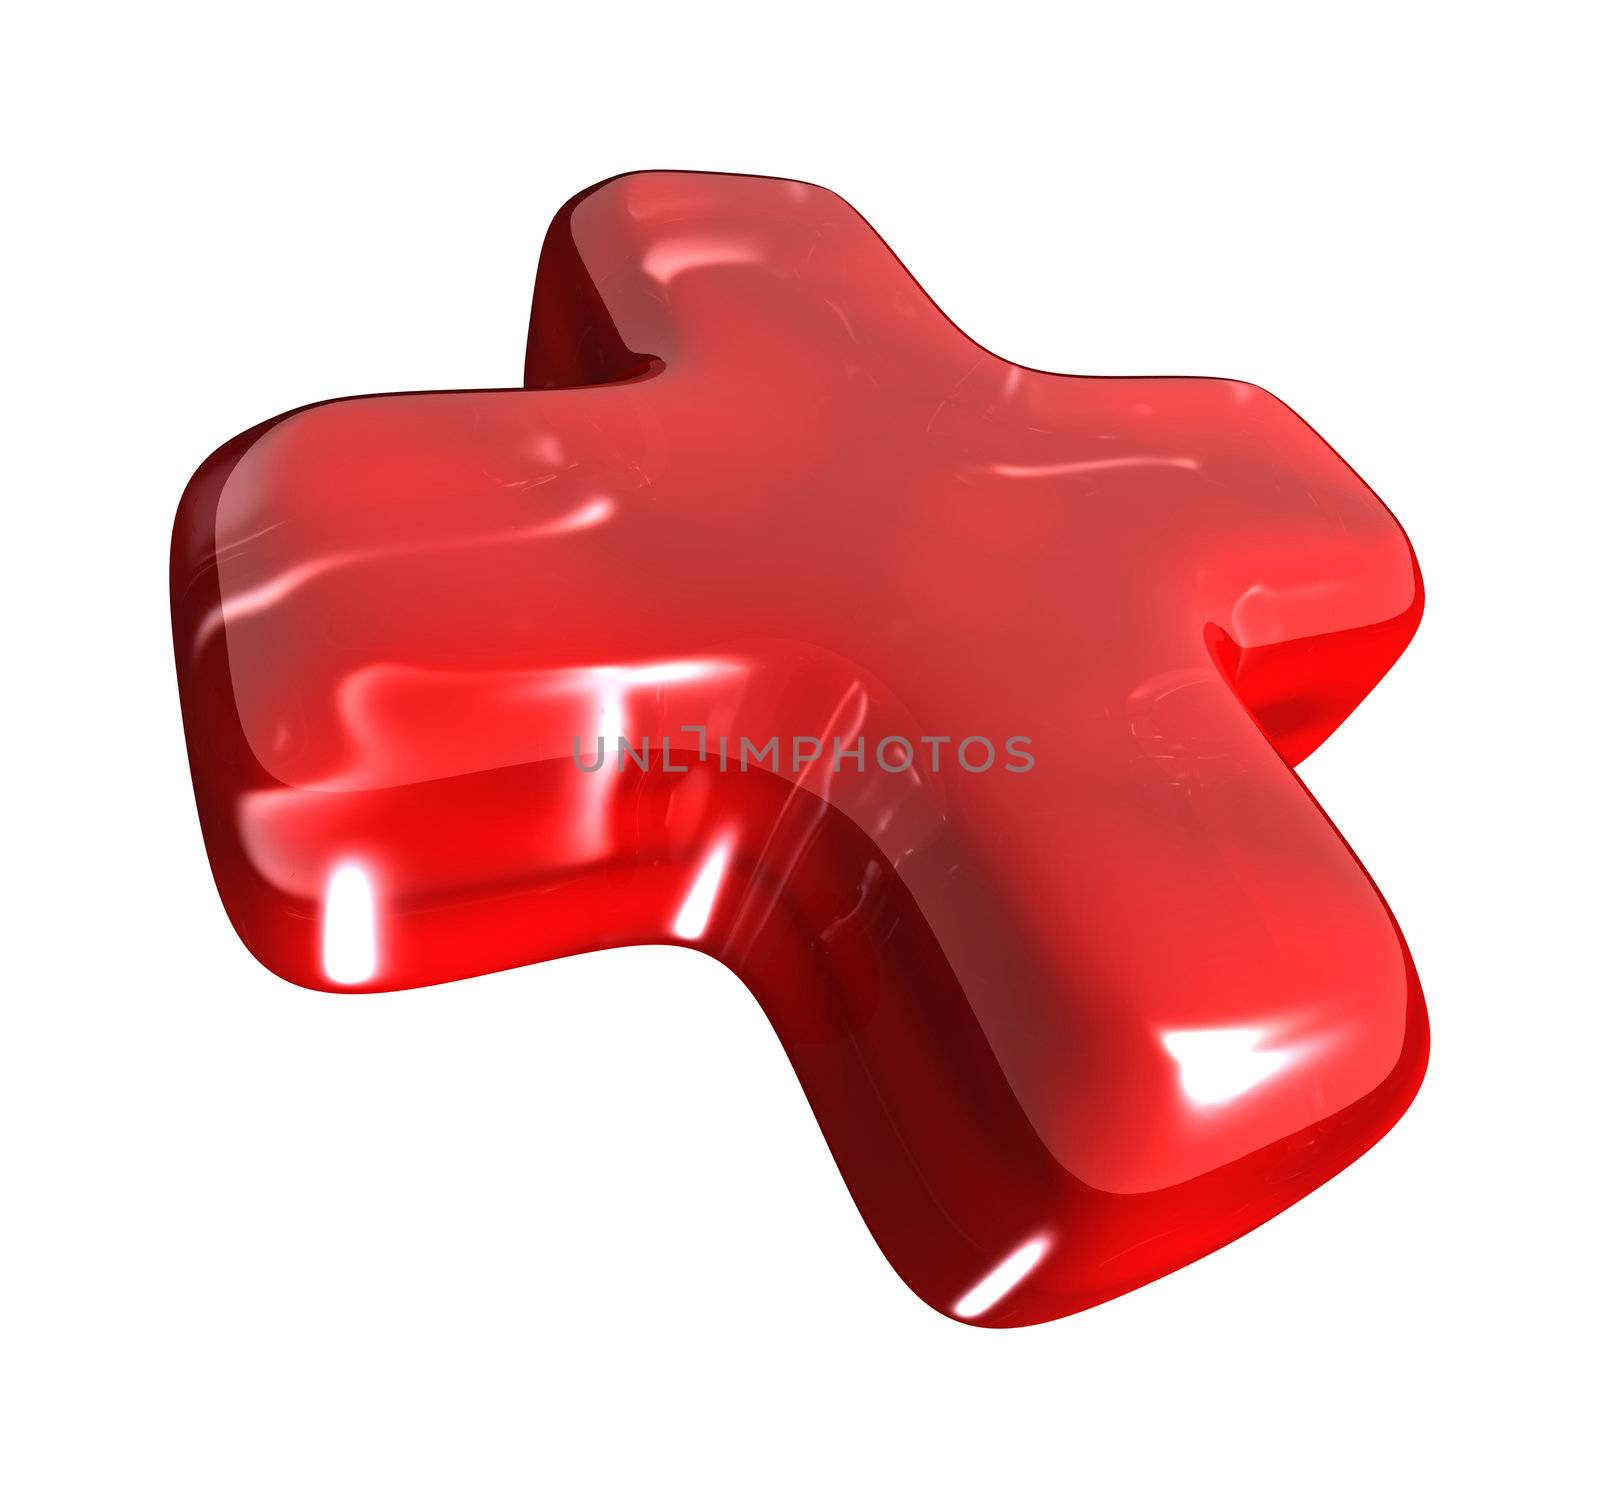 An image of a nice red 3D cross